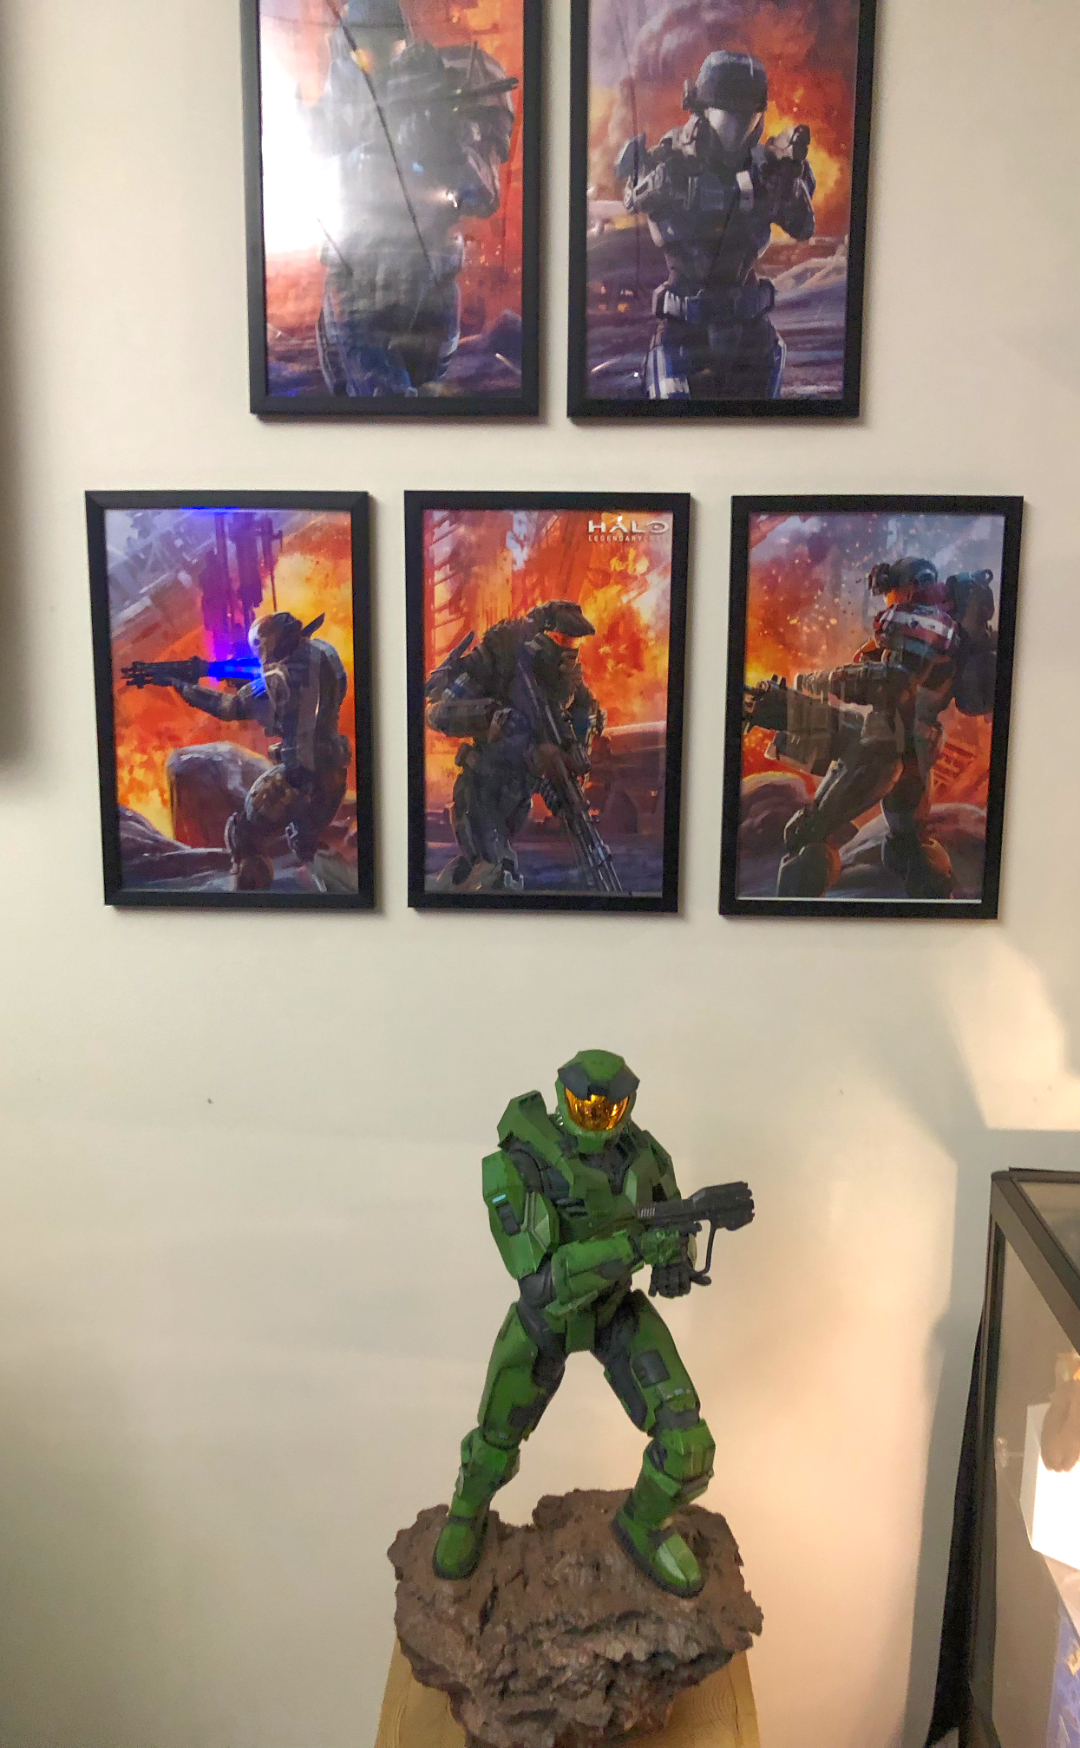 Master Chief along some Halo Reach posters on the wall